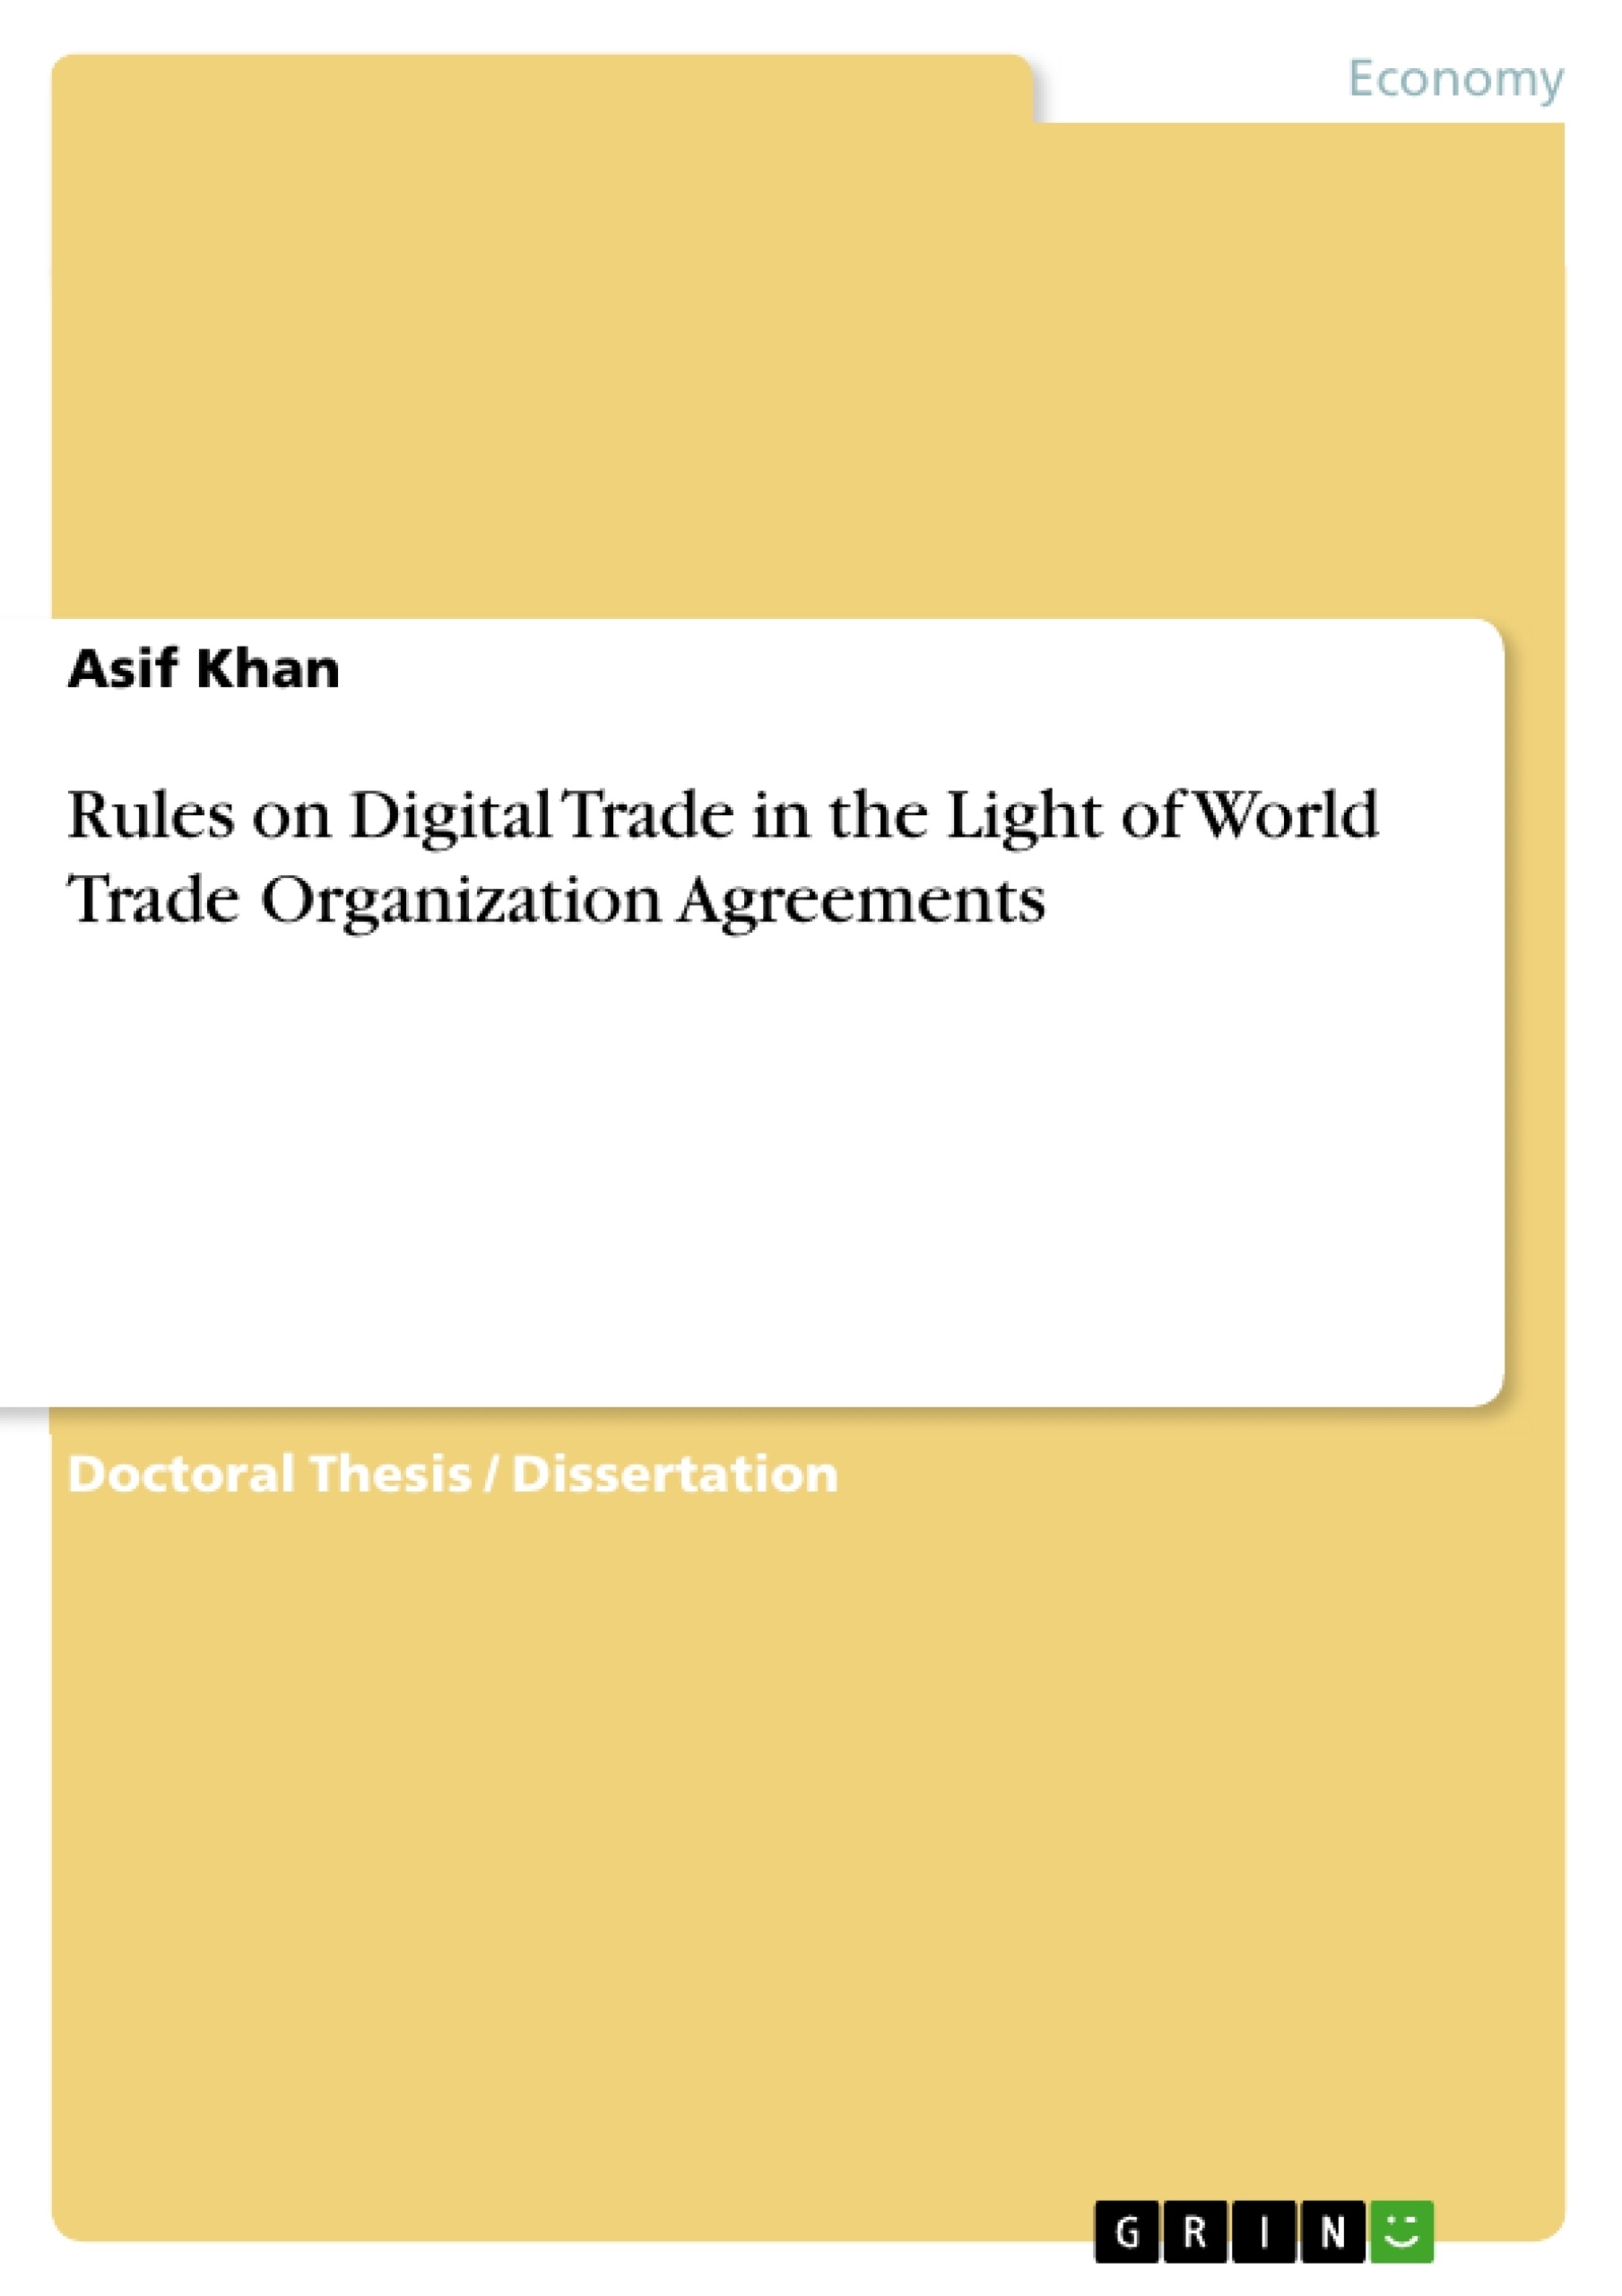 Title: Rules on Digital Trade in the Light of World Trade Organization Agreements